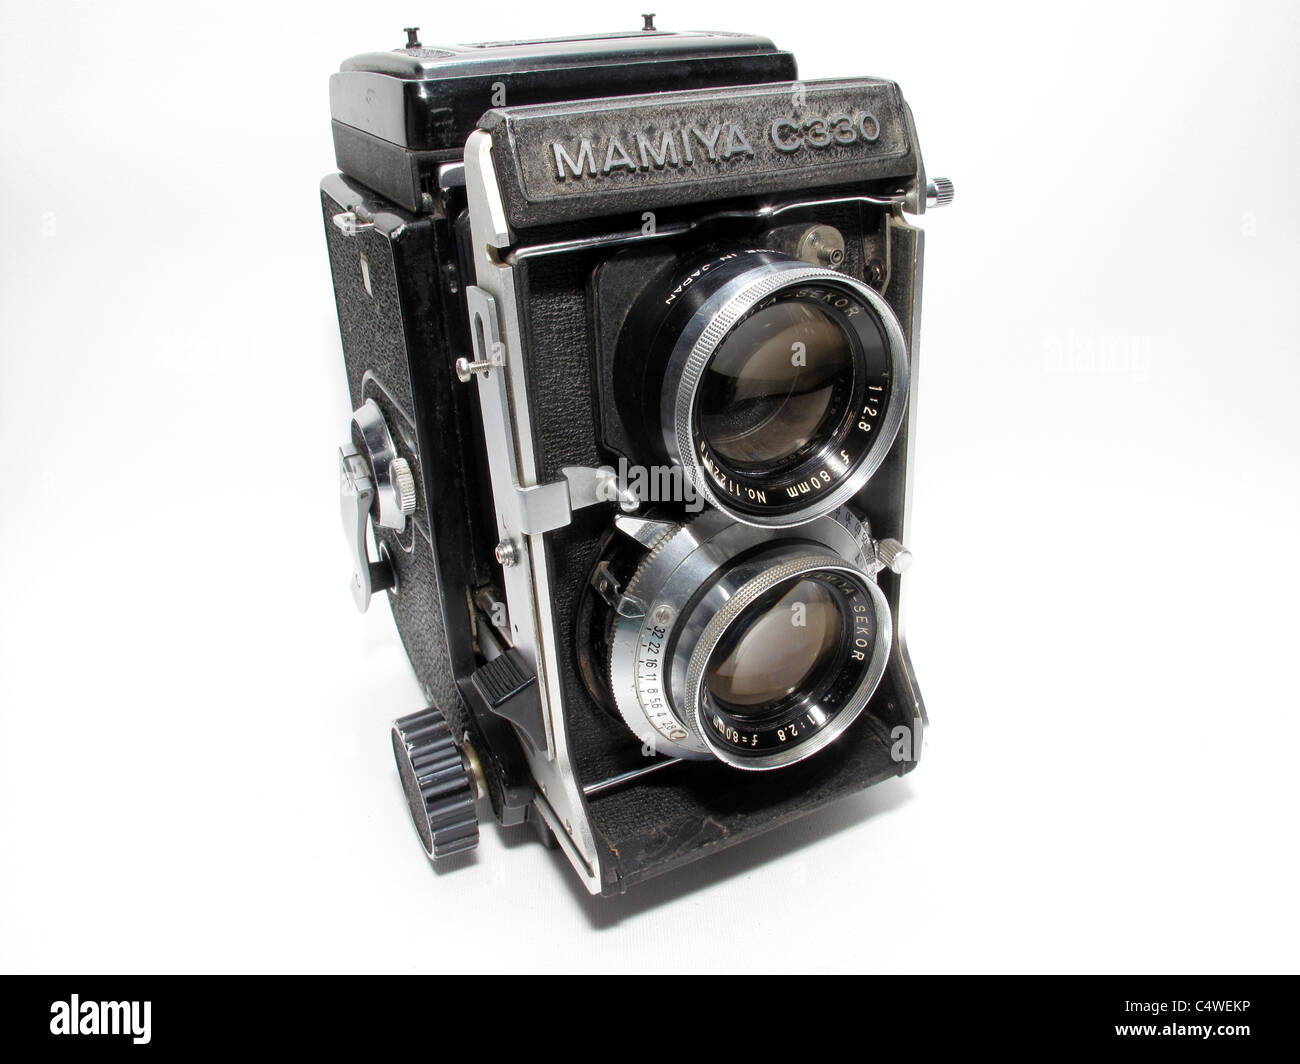 Mamiya C330 professional film Twin Lens Reflex Camera Base - a camera much use by pros in the 1980s Stock Photo